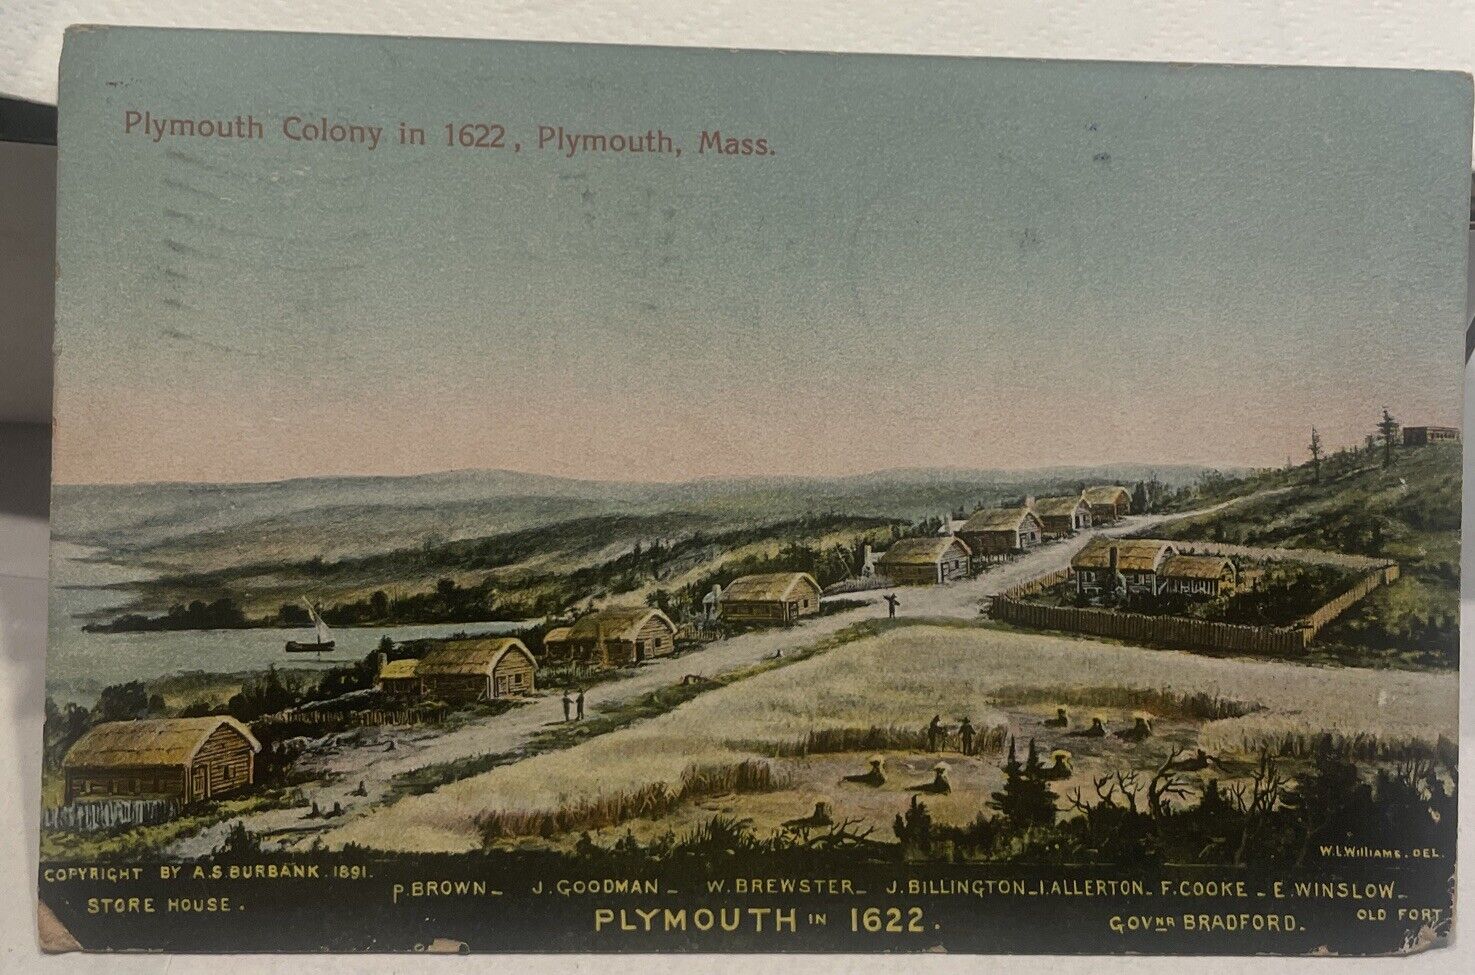 used 1908  postcard  PLYMOUTH Massachusetts~Antique  Colony 1622